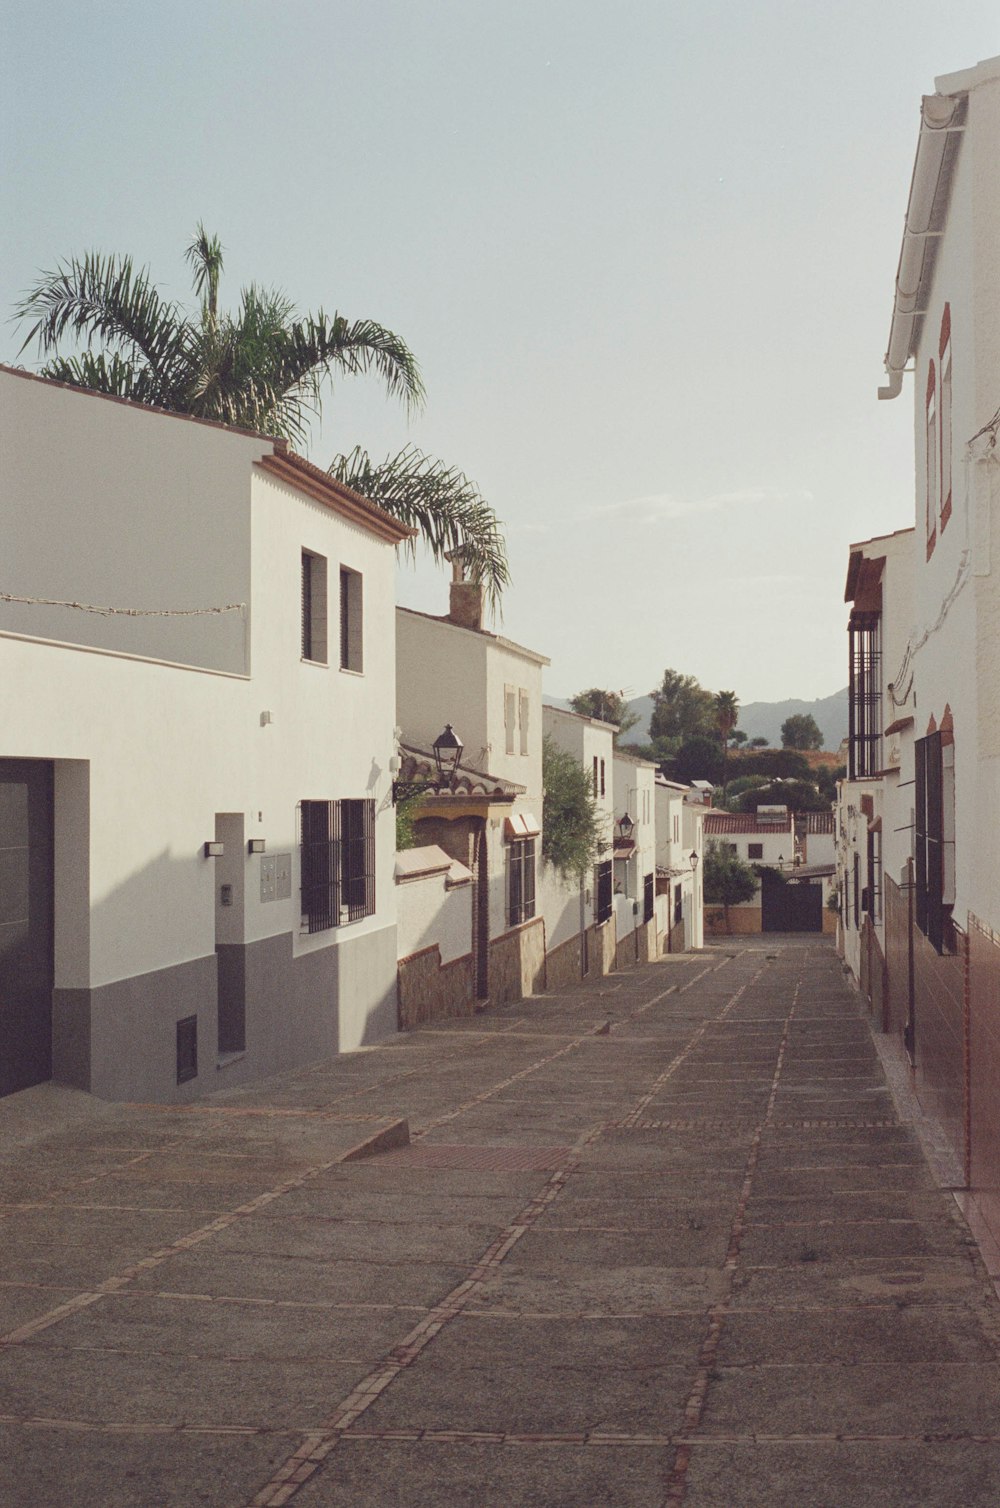 an empty street with buildings and a palm tree